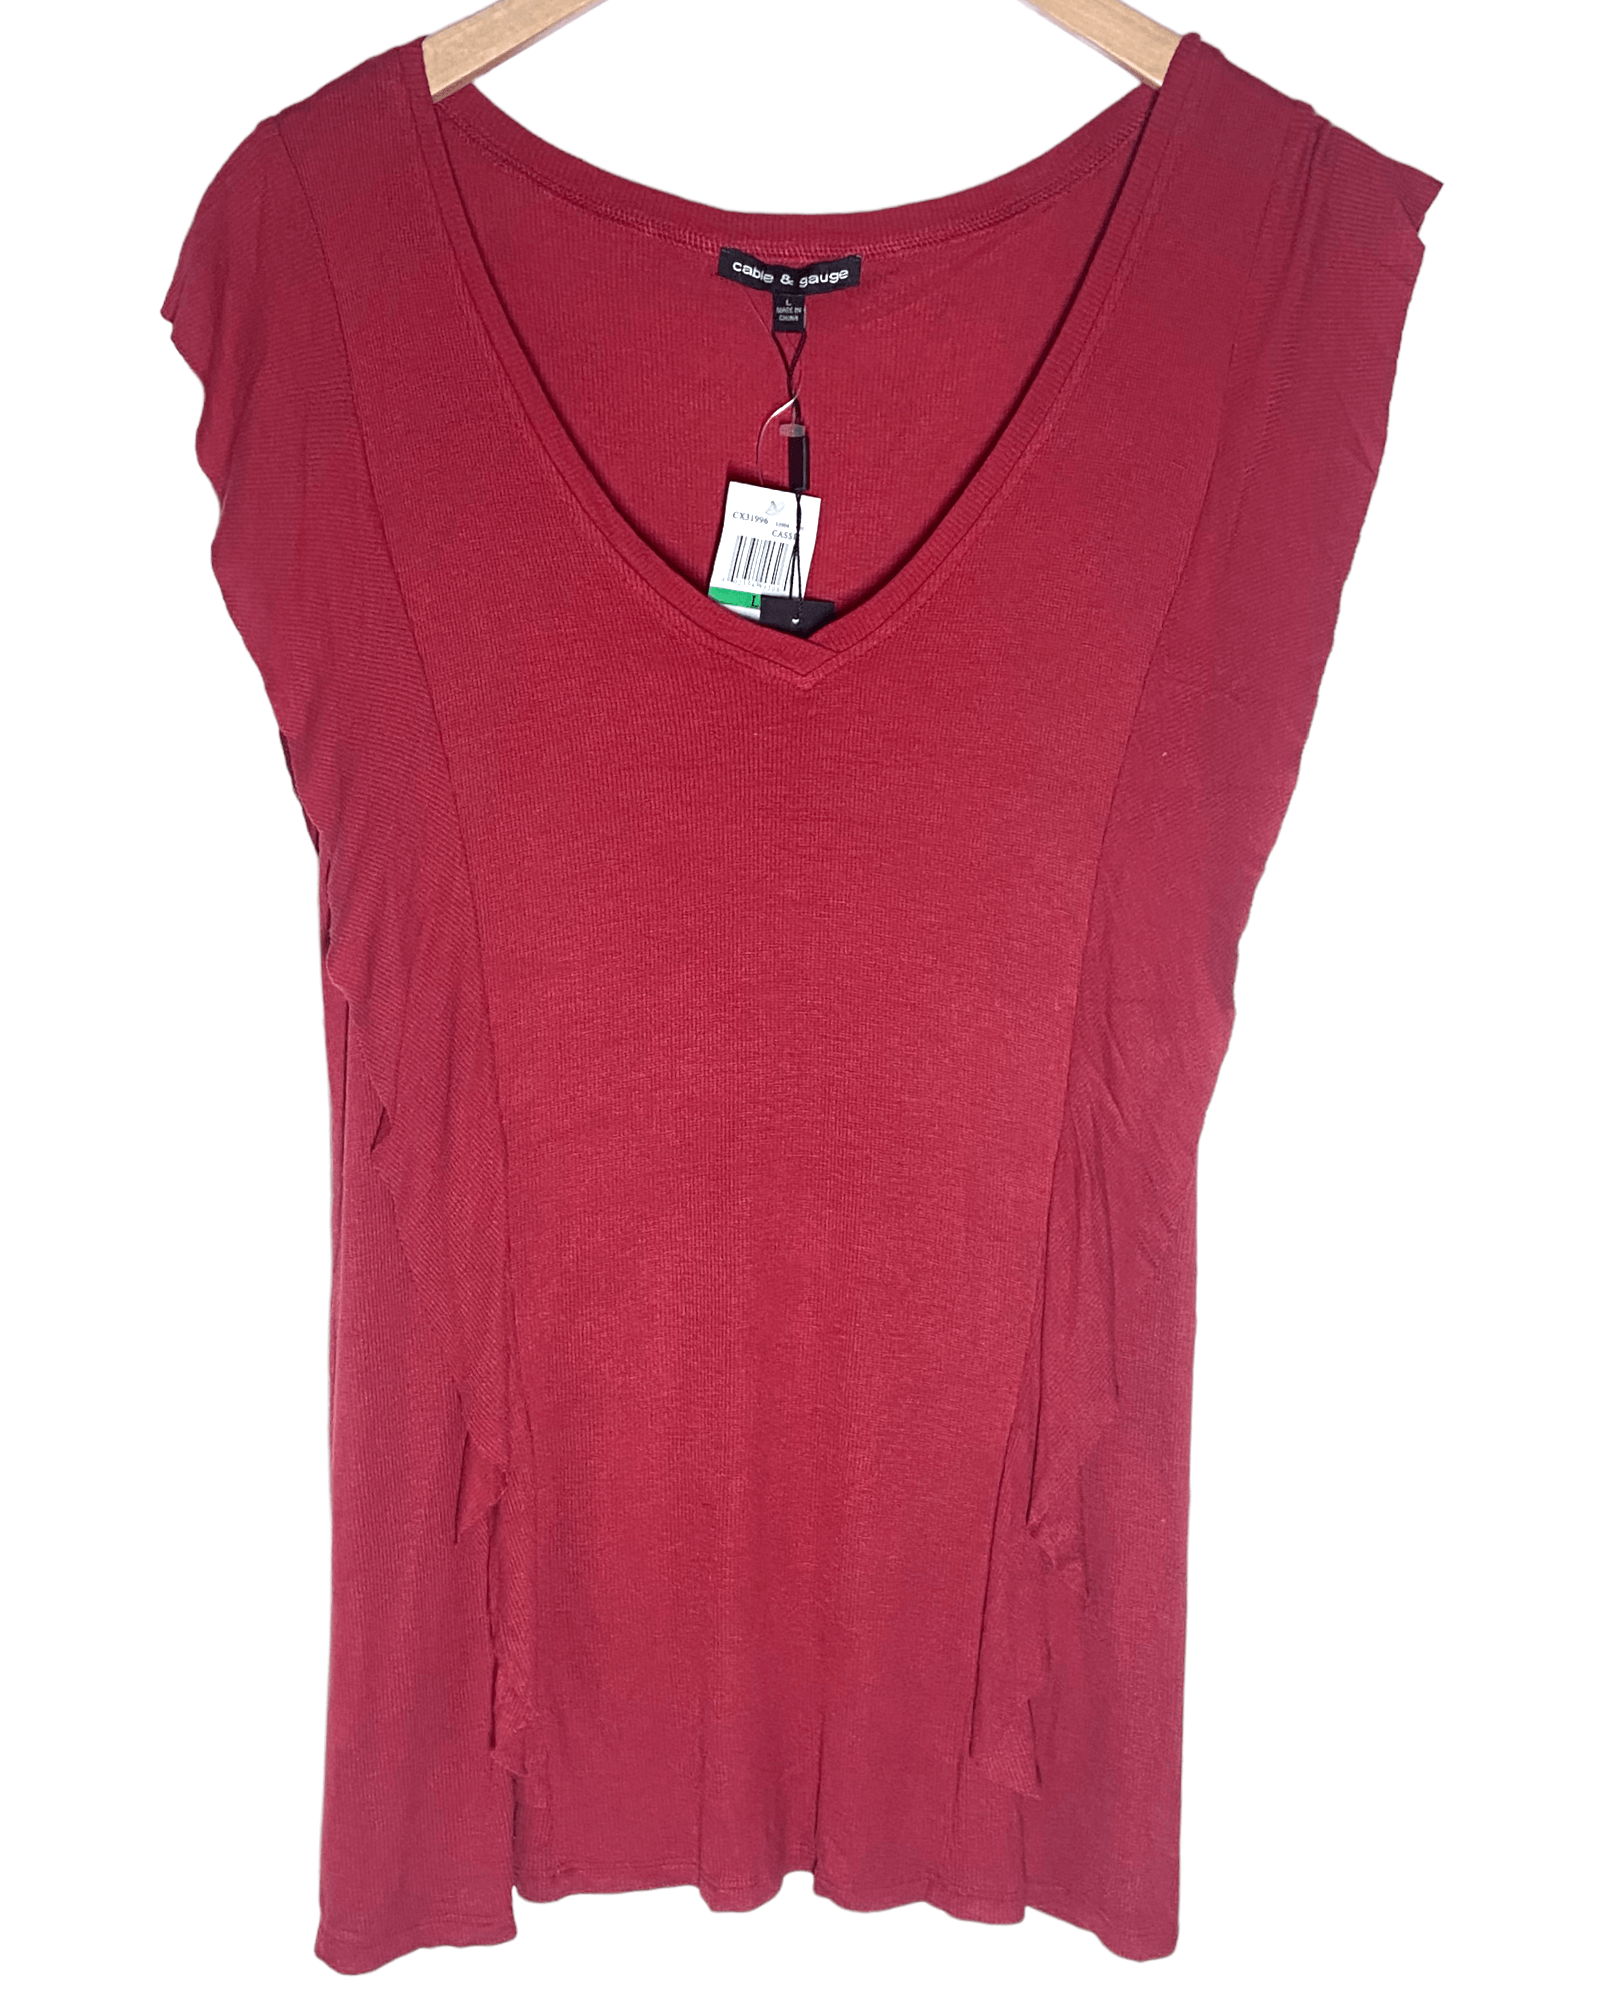 Soft Autumn CABLE & GAUGE ribbed ruffle top red